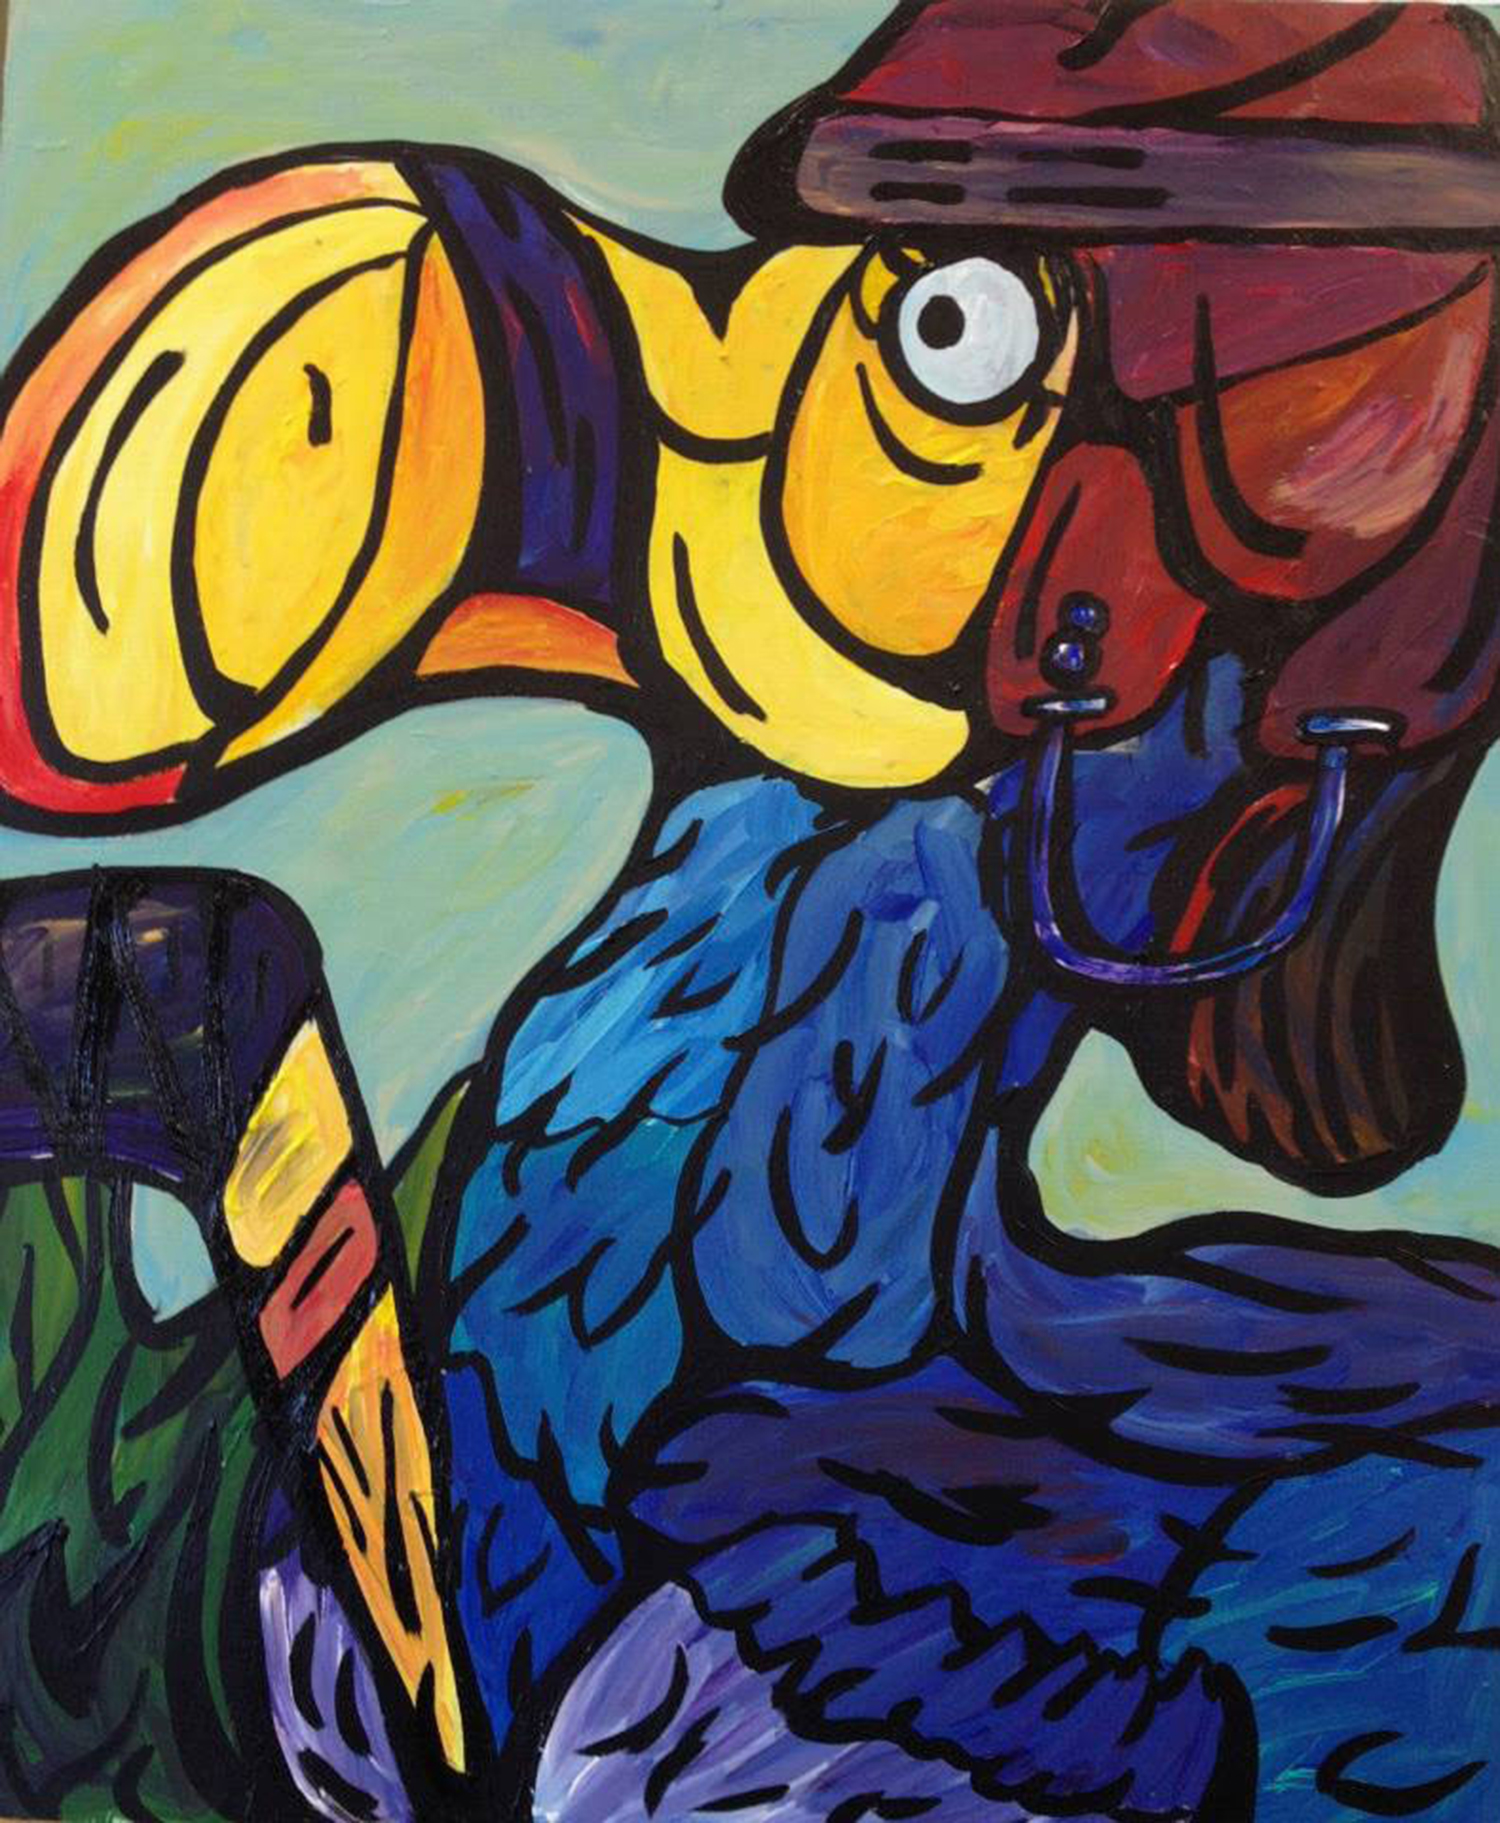 A colorful, abstract painting of a dodo bird in a cap holding a hockey stick. Painting by Courtney Huston